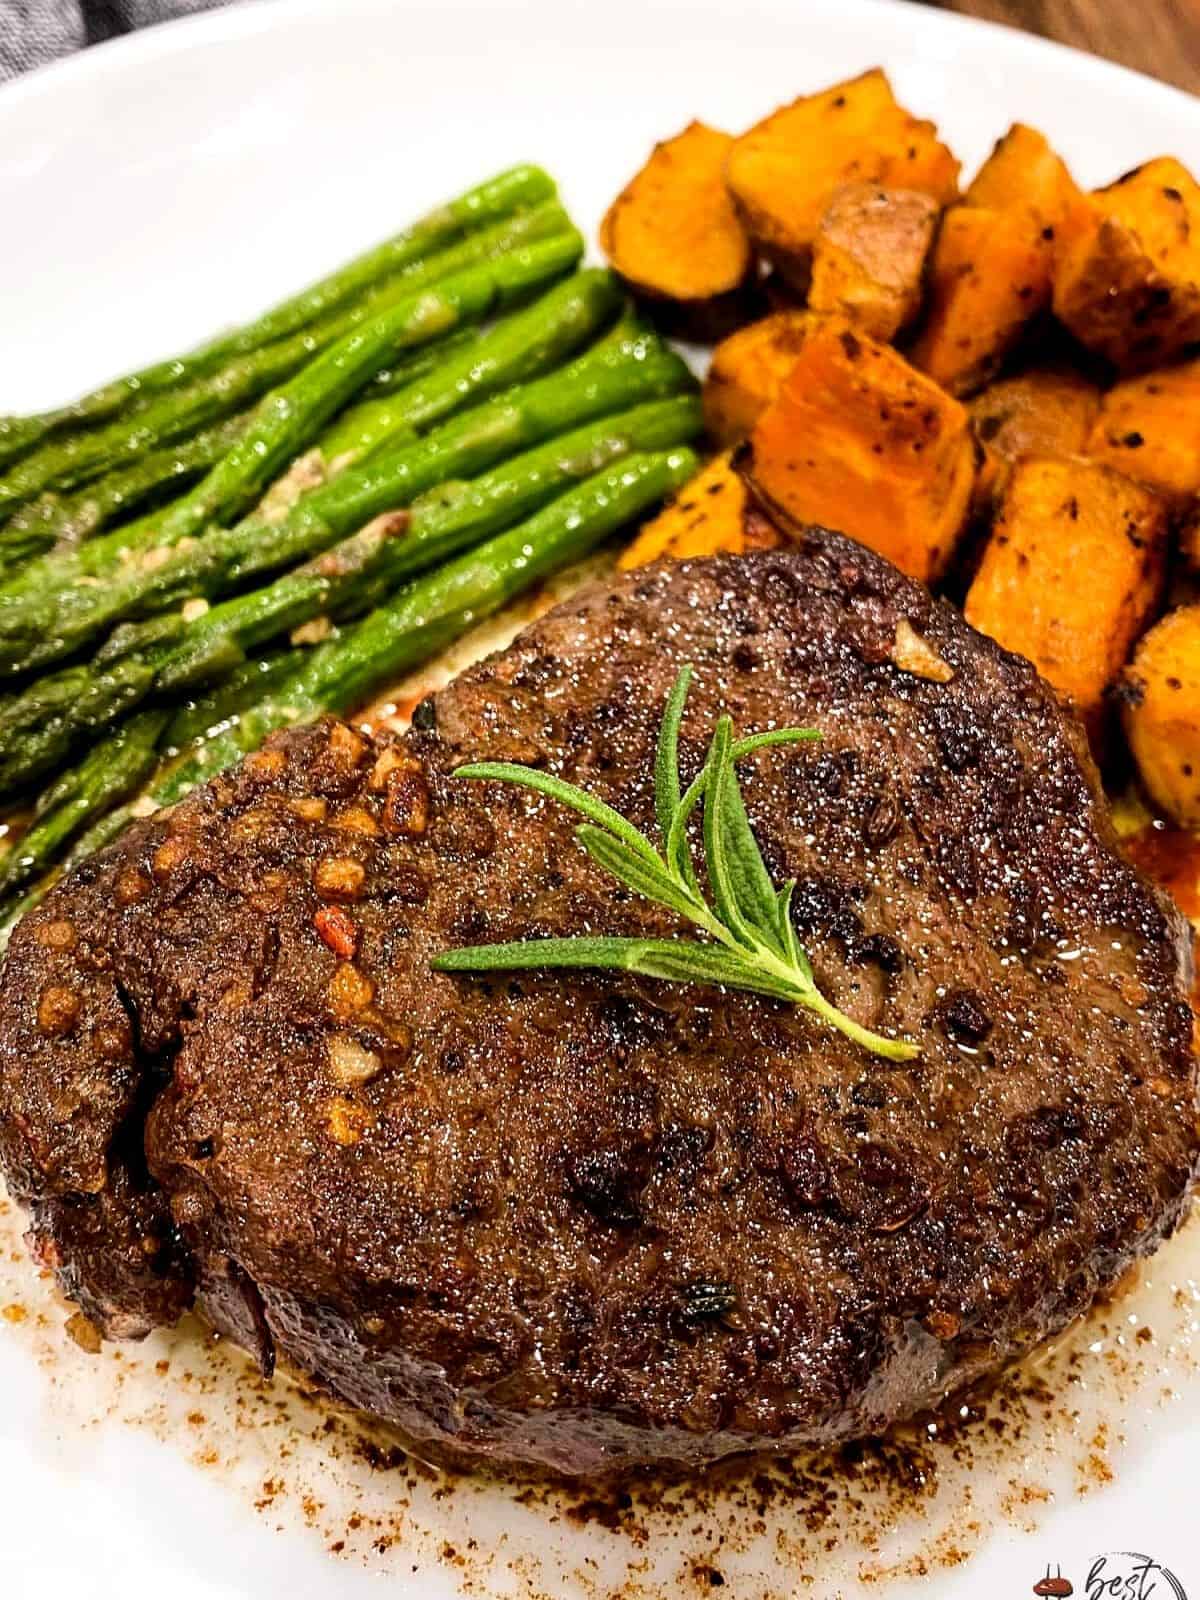 Filet mignon served with vegetables.